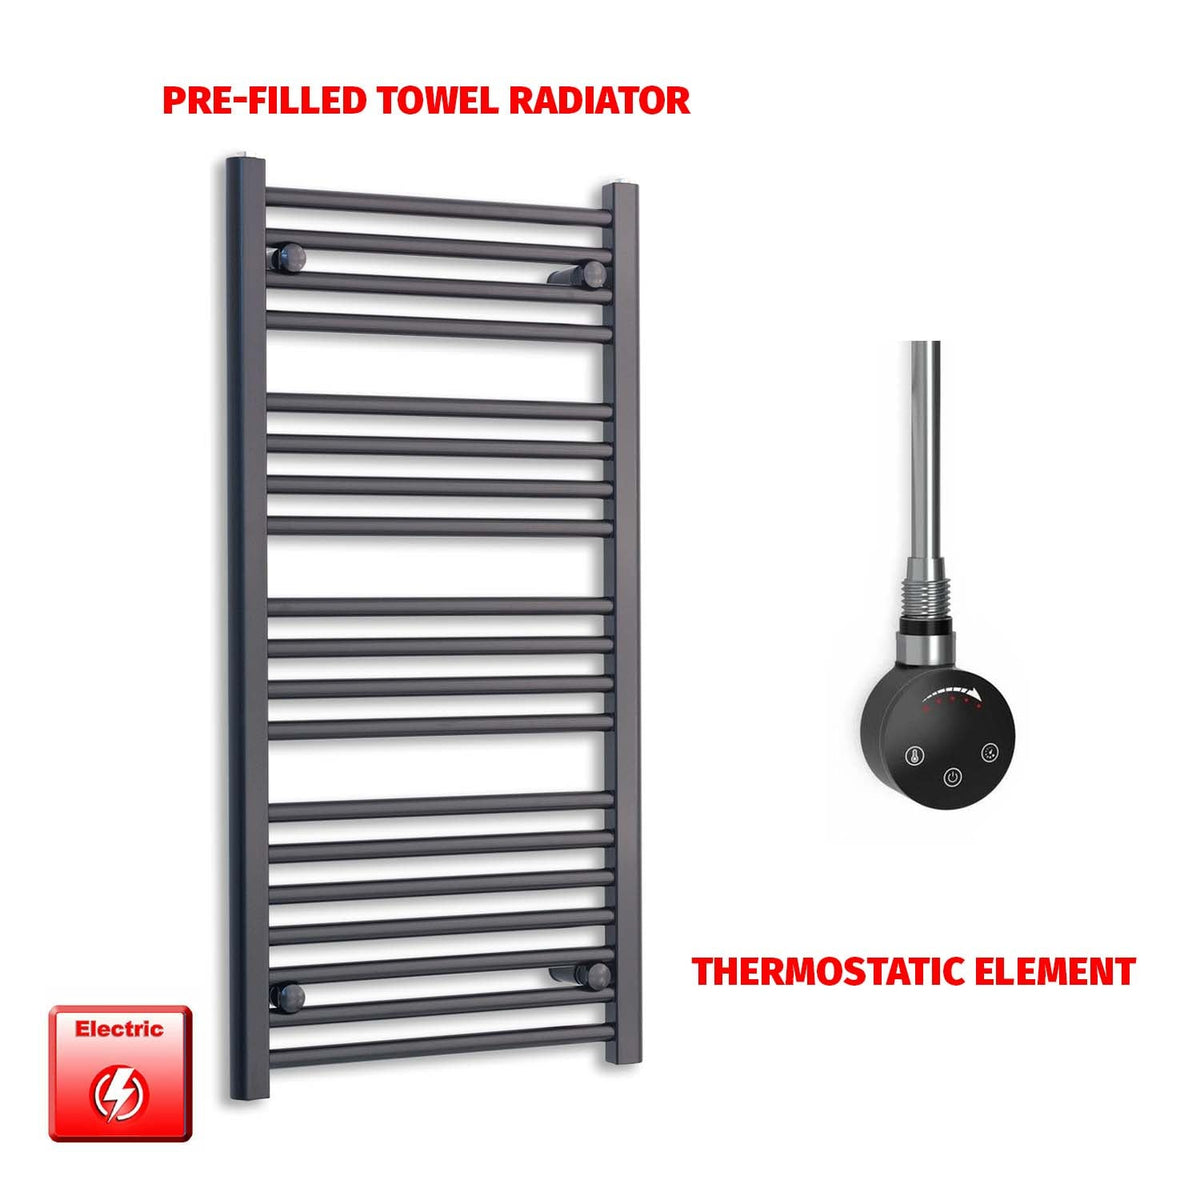 1000 x 550mm Wide Flat Black Pre-Filled Electric Heated Towel Radiator HTR SMART Thermostatic No Timer